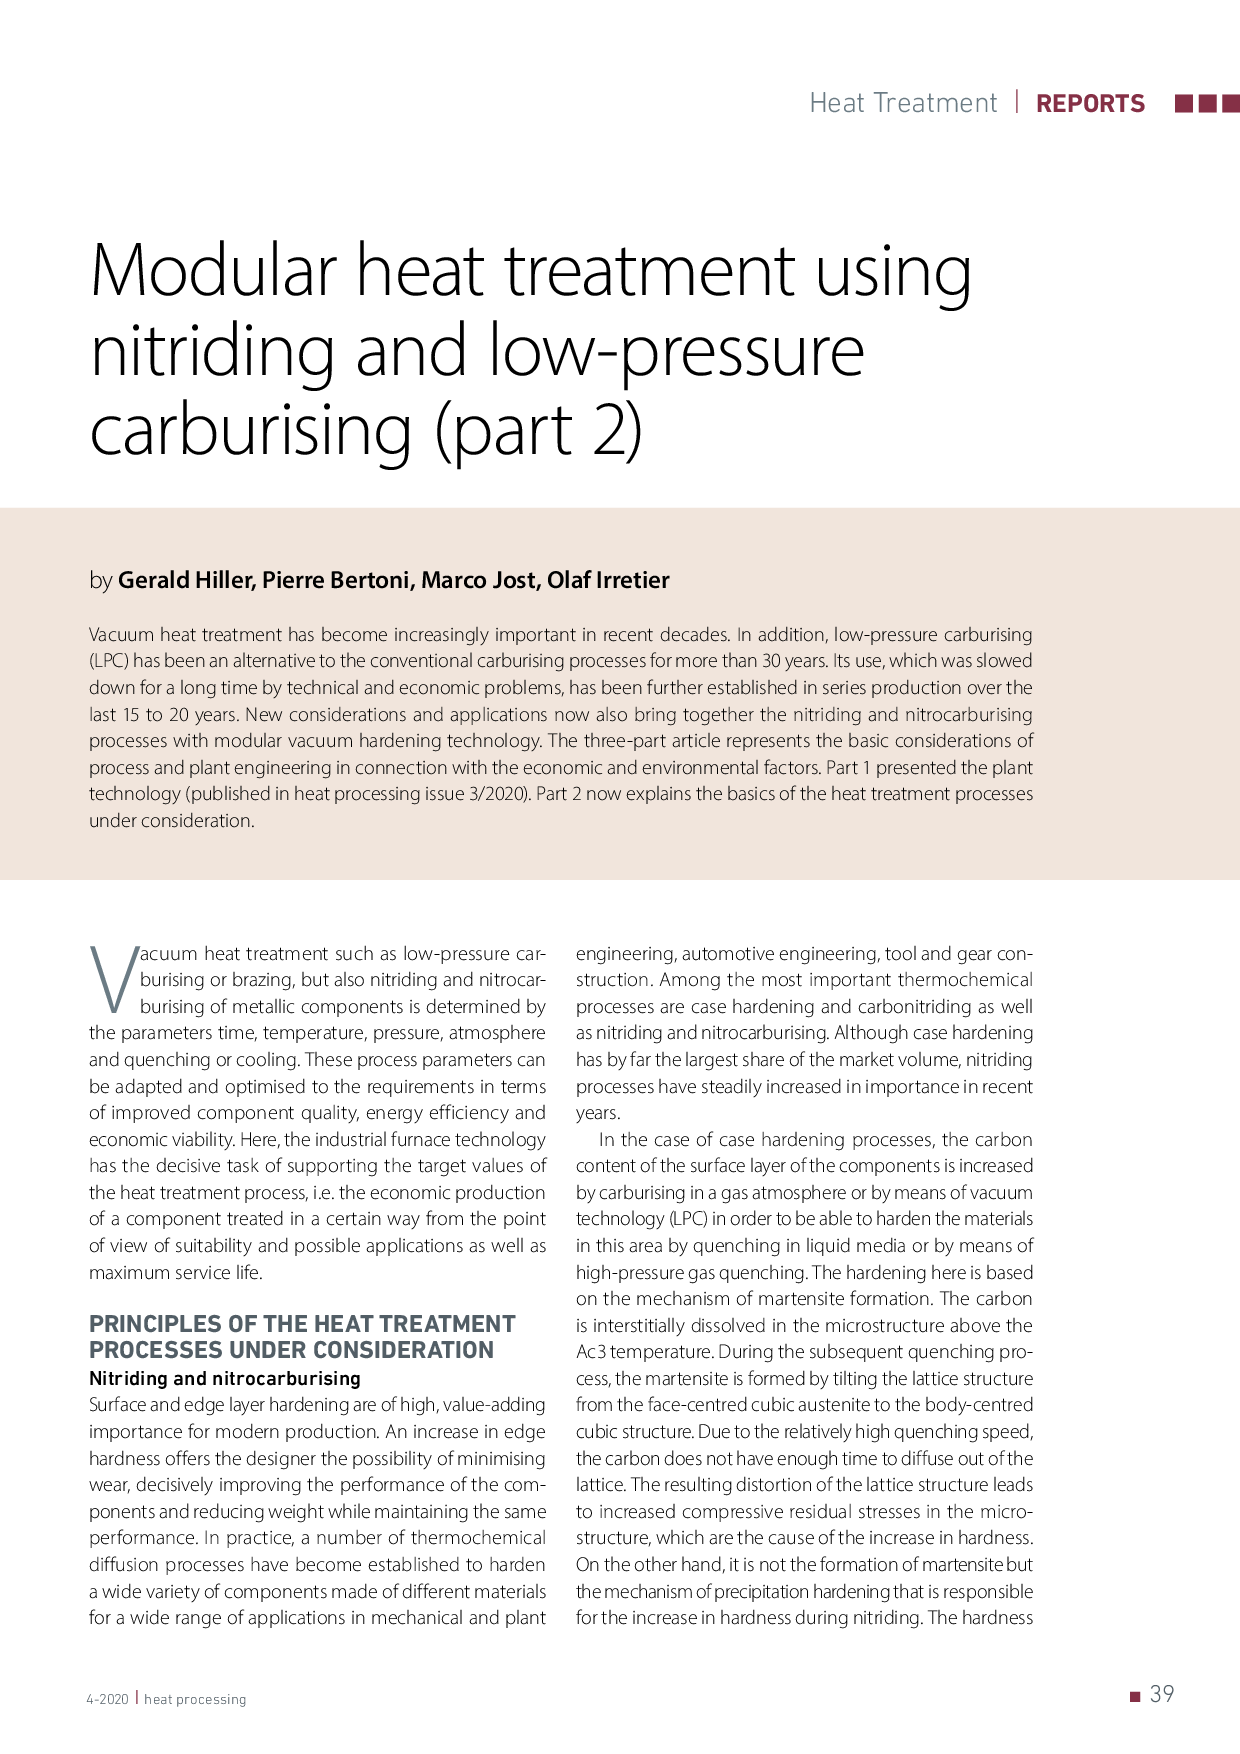 Modular heat treatment using nitriding and low-pressure carburising (part 2)